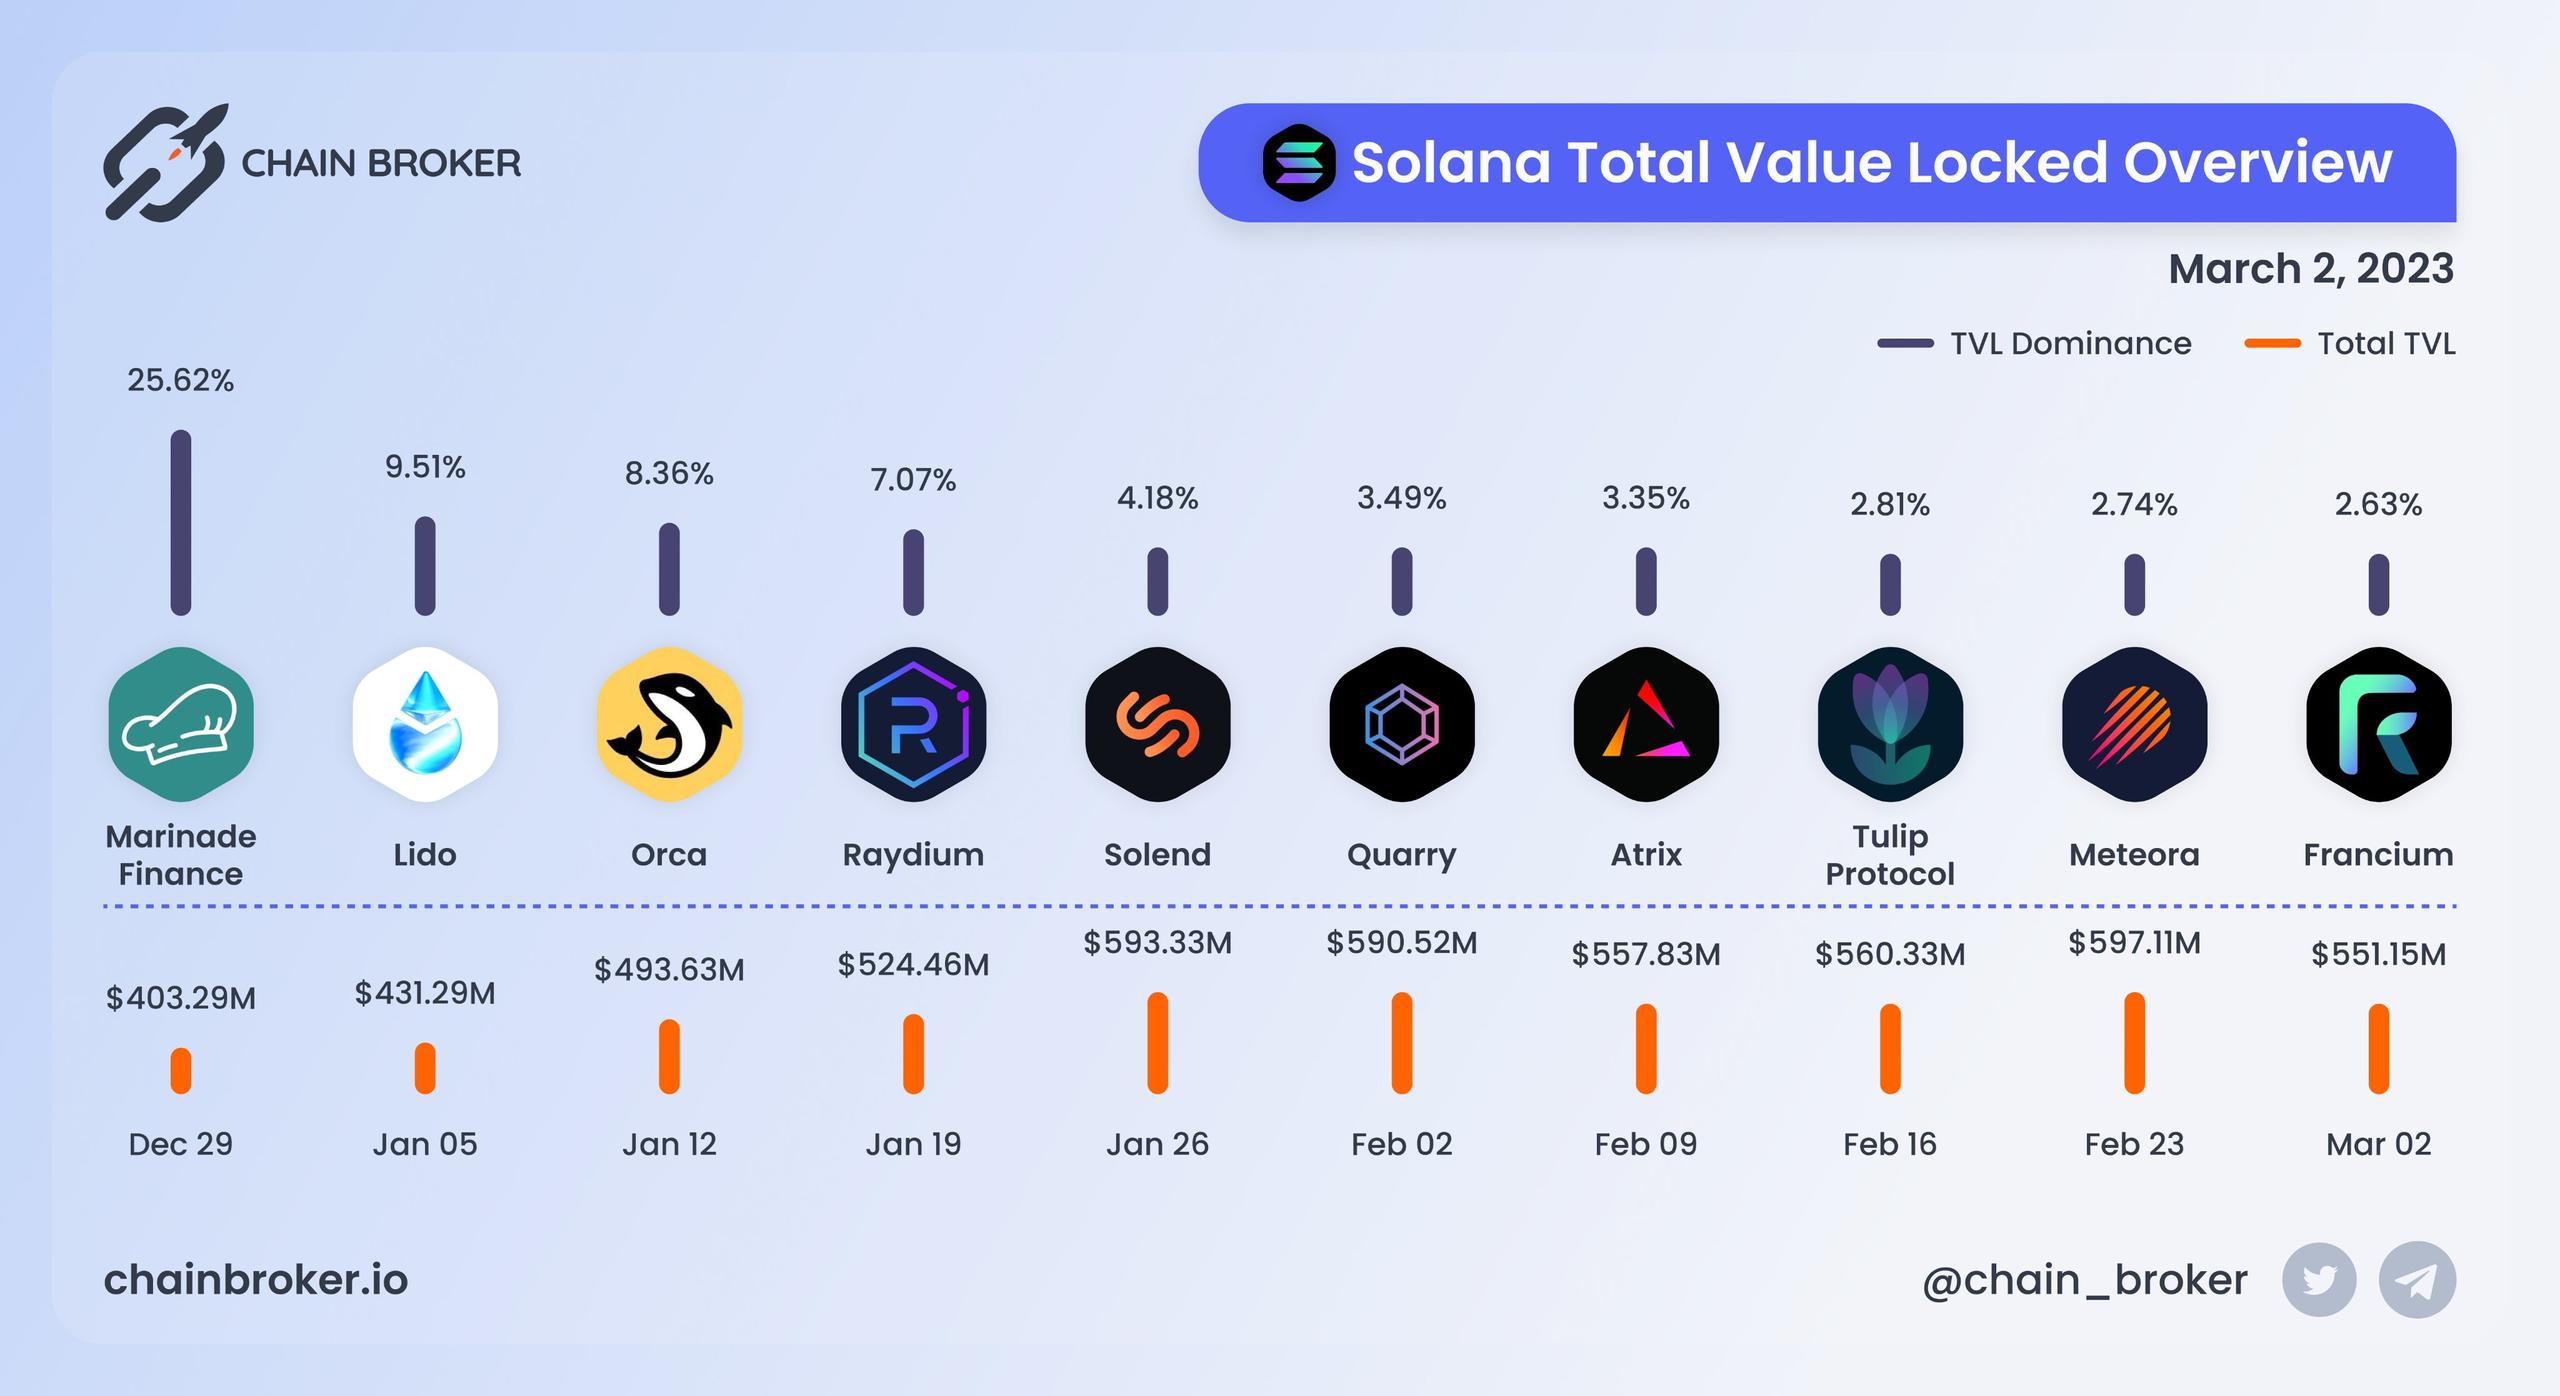 Solana total value locked overview